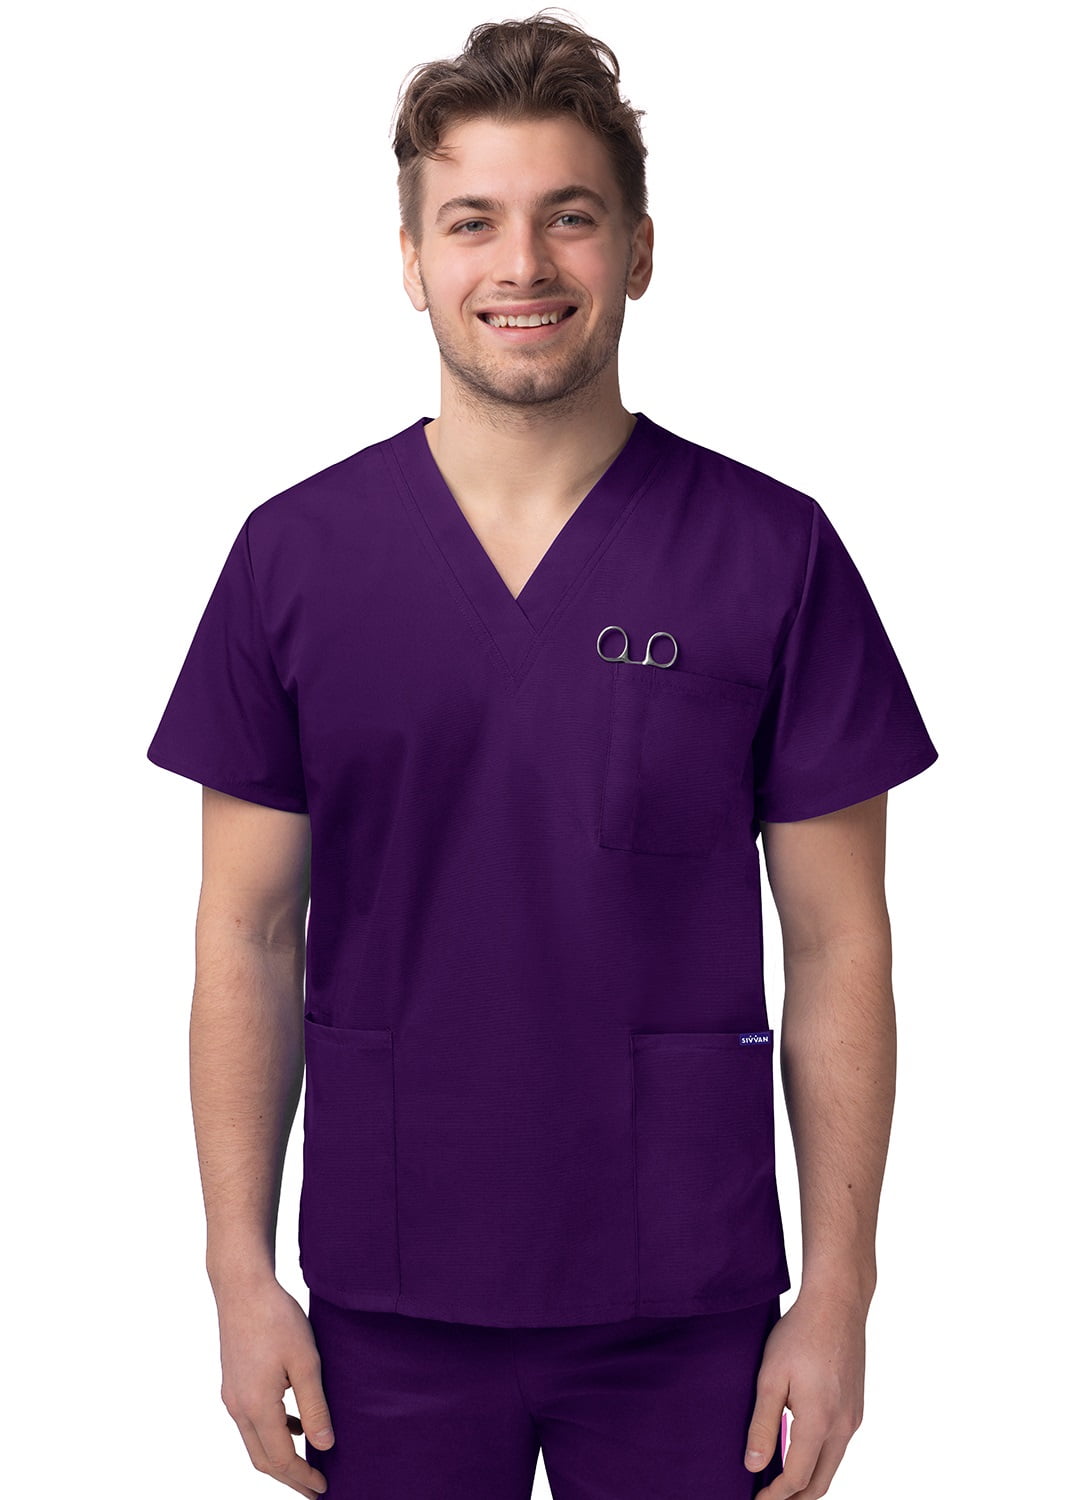 Available in 15 Colors Sivvan Unisex V-Neck 3 Pocket Scrub Top 